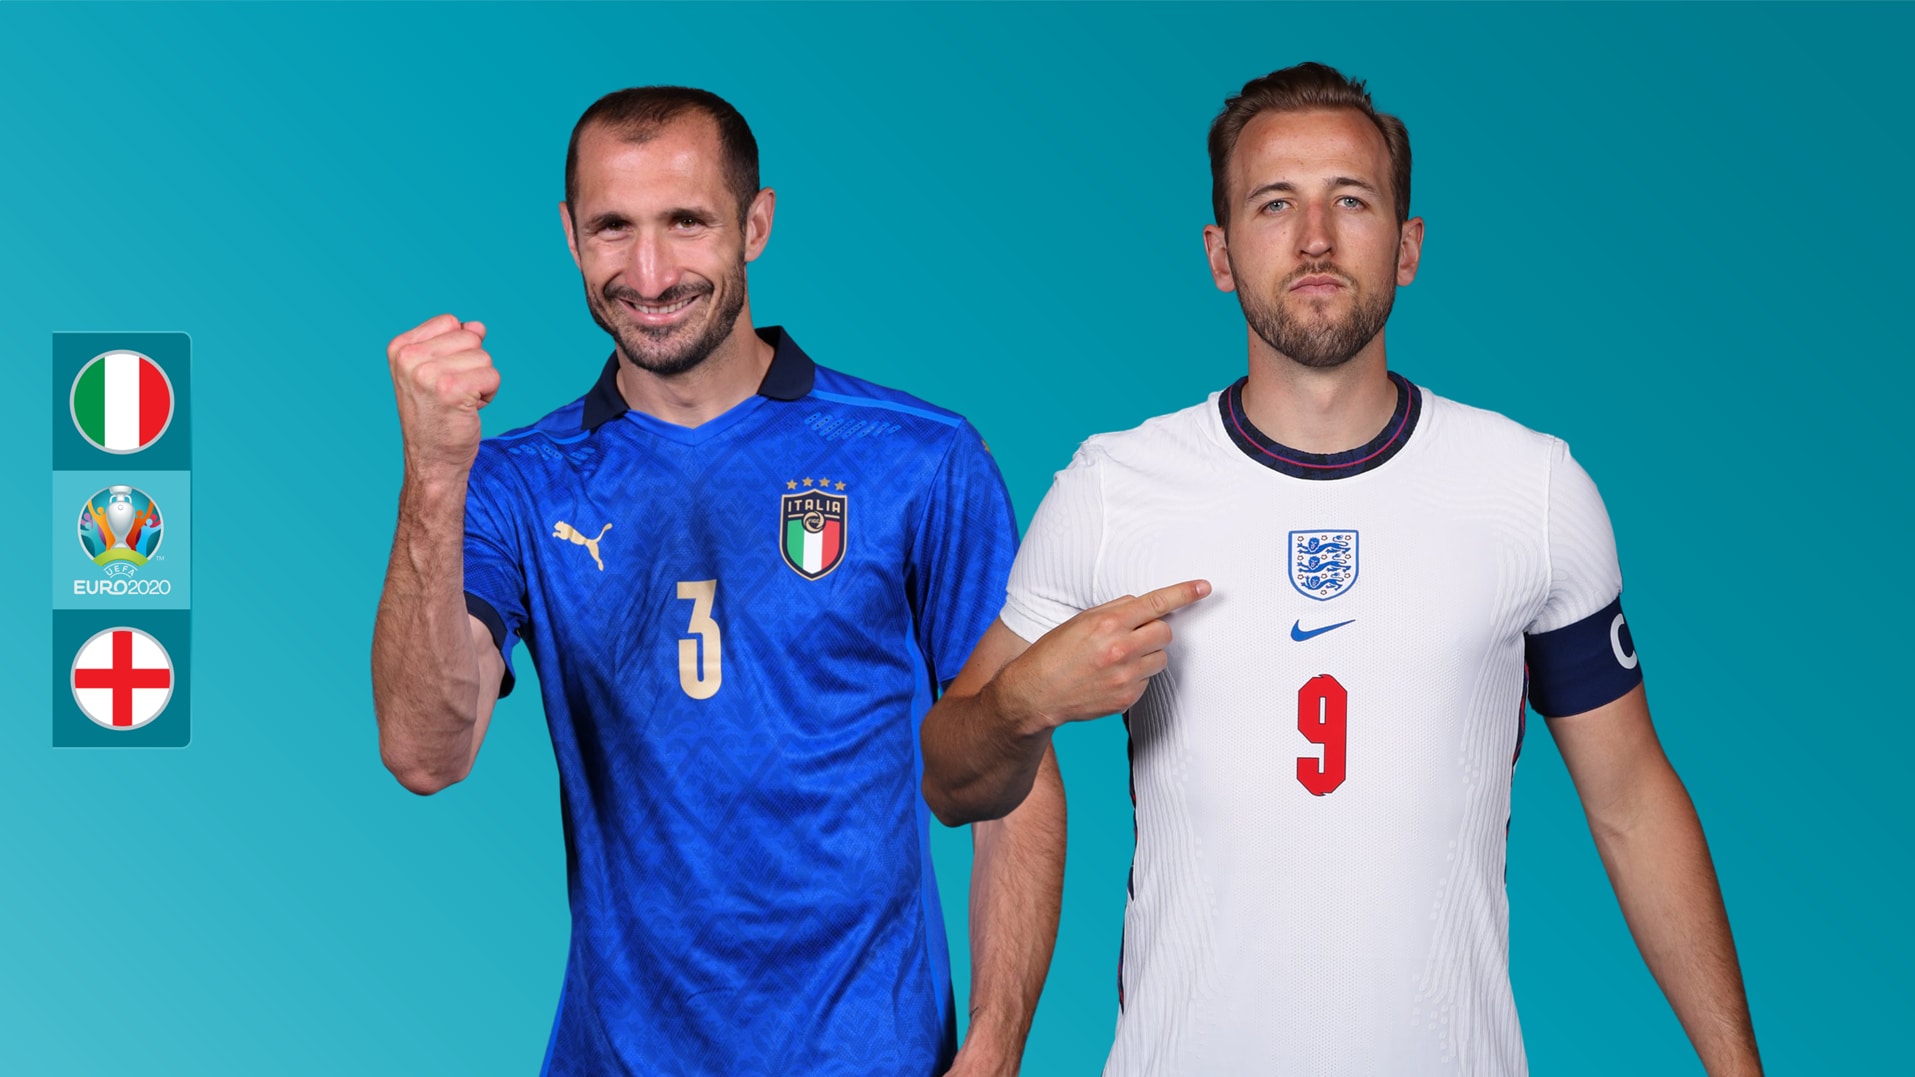 Will the Euro 2020 Final on Sunday be England’s 7th successive loss against Italy?